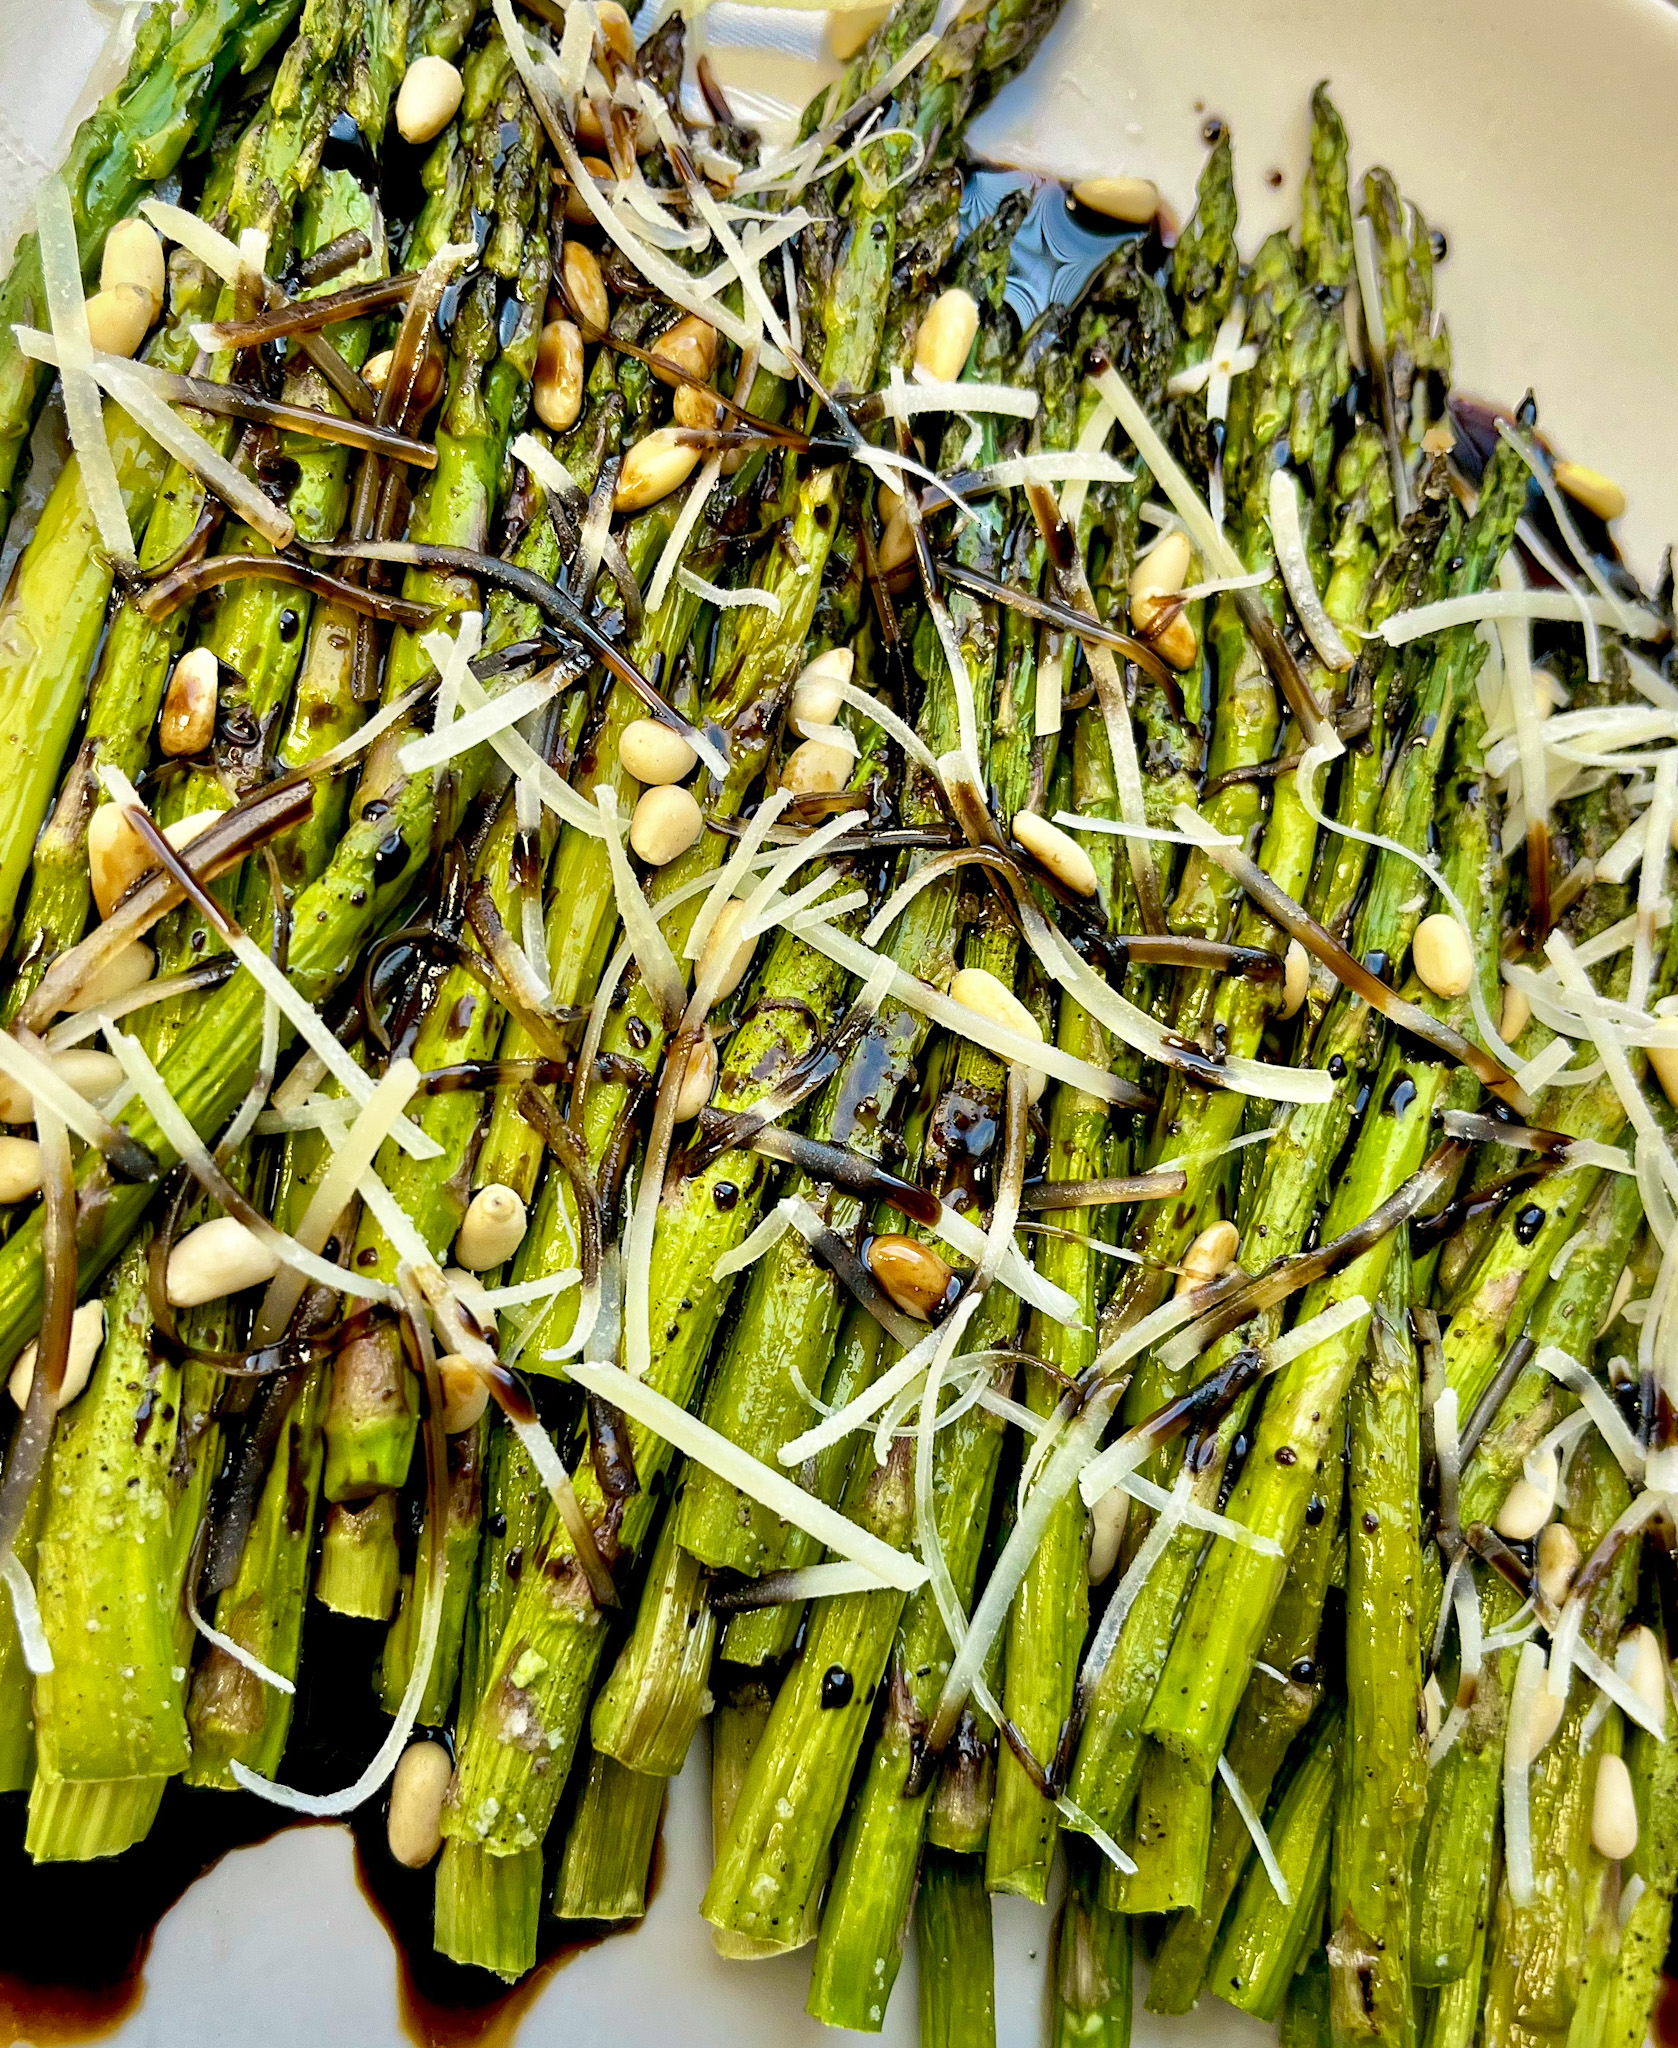 Asparagus can be grilled or roasted for a classic springtime side. (NDSU photo)